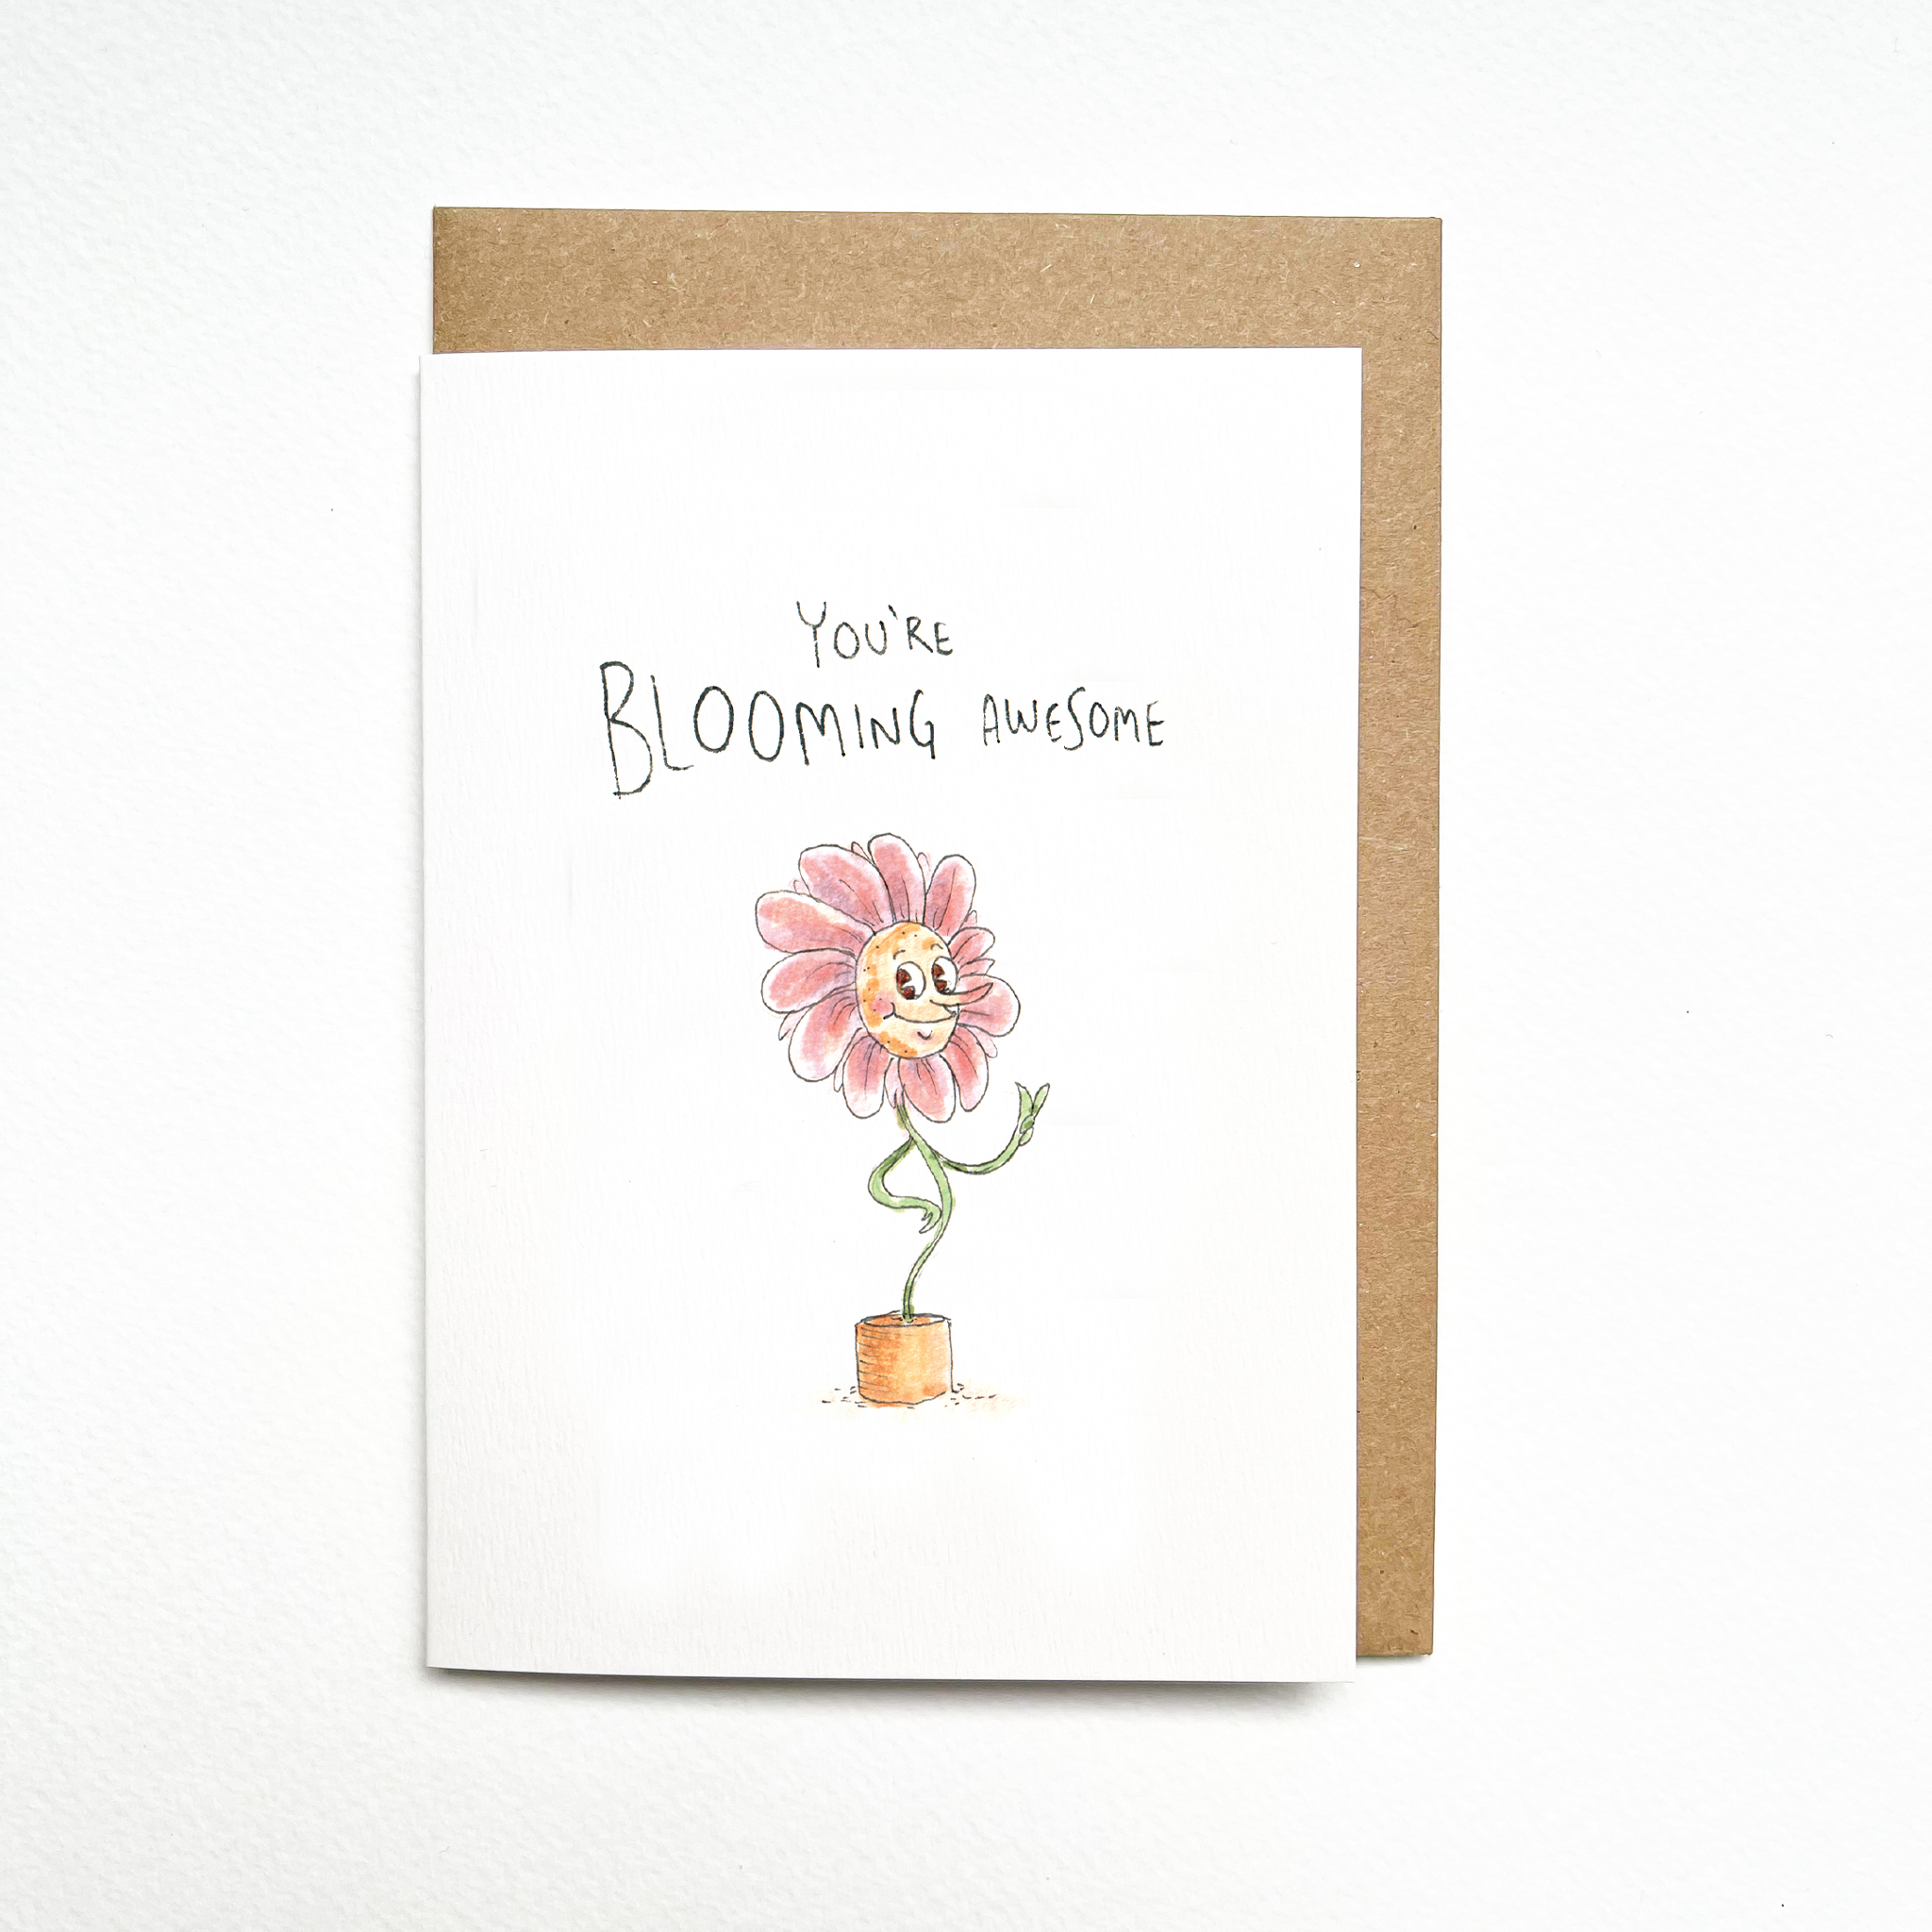 You're Blooming Awesome